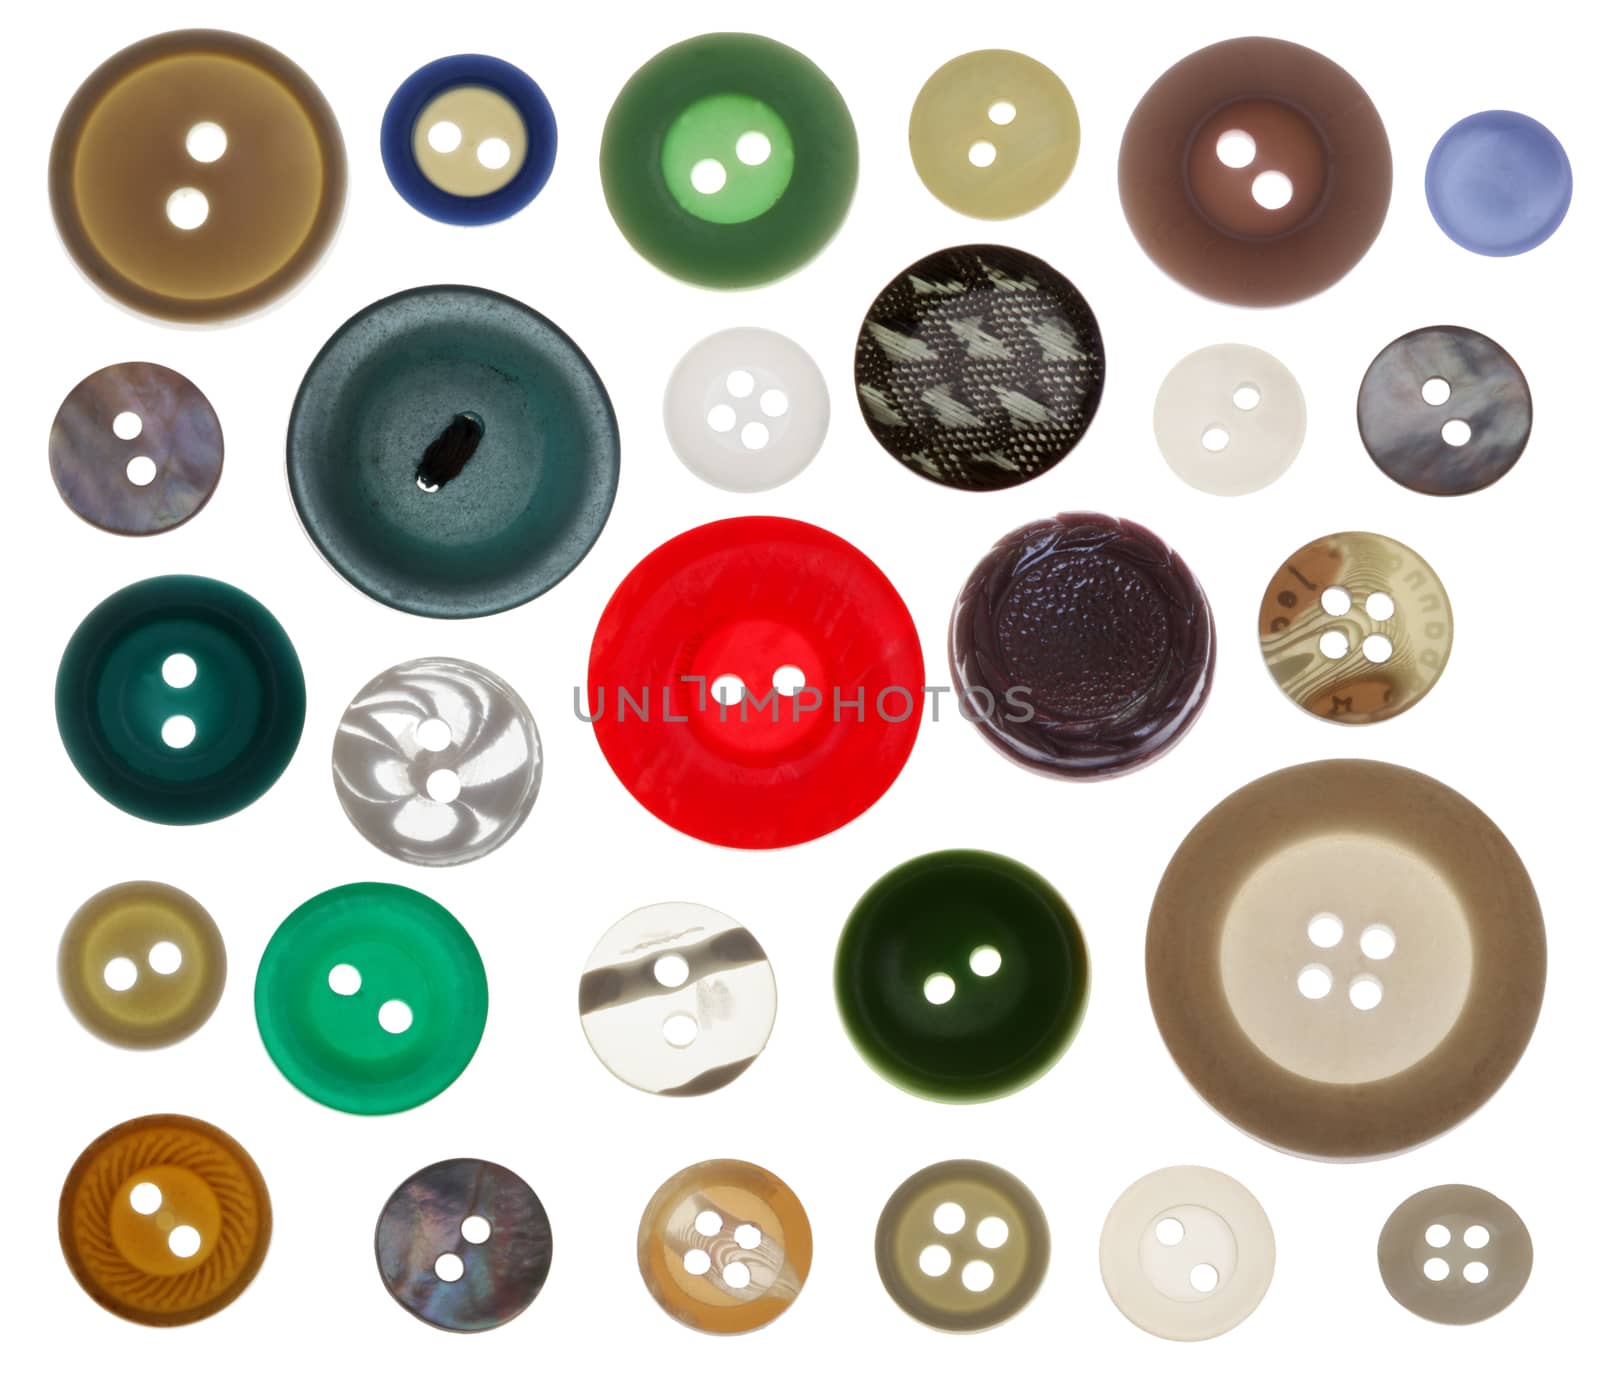 collection of various sewing button on white background by rudchenko